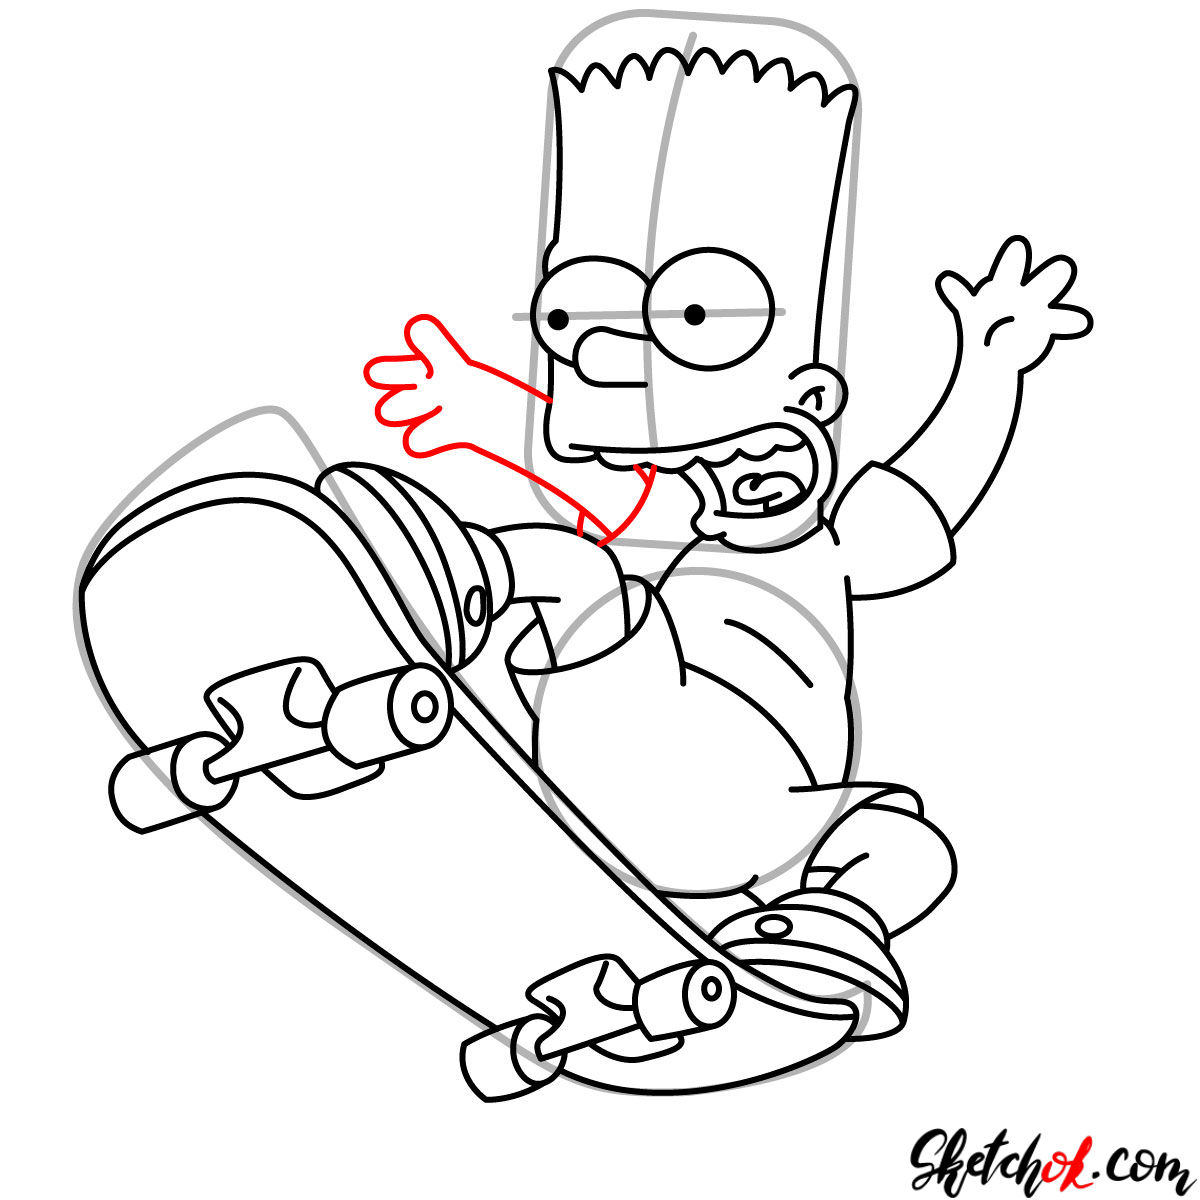 How to draw Bart Simpson on a skateboard - step 12